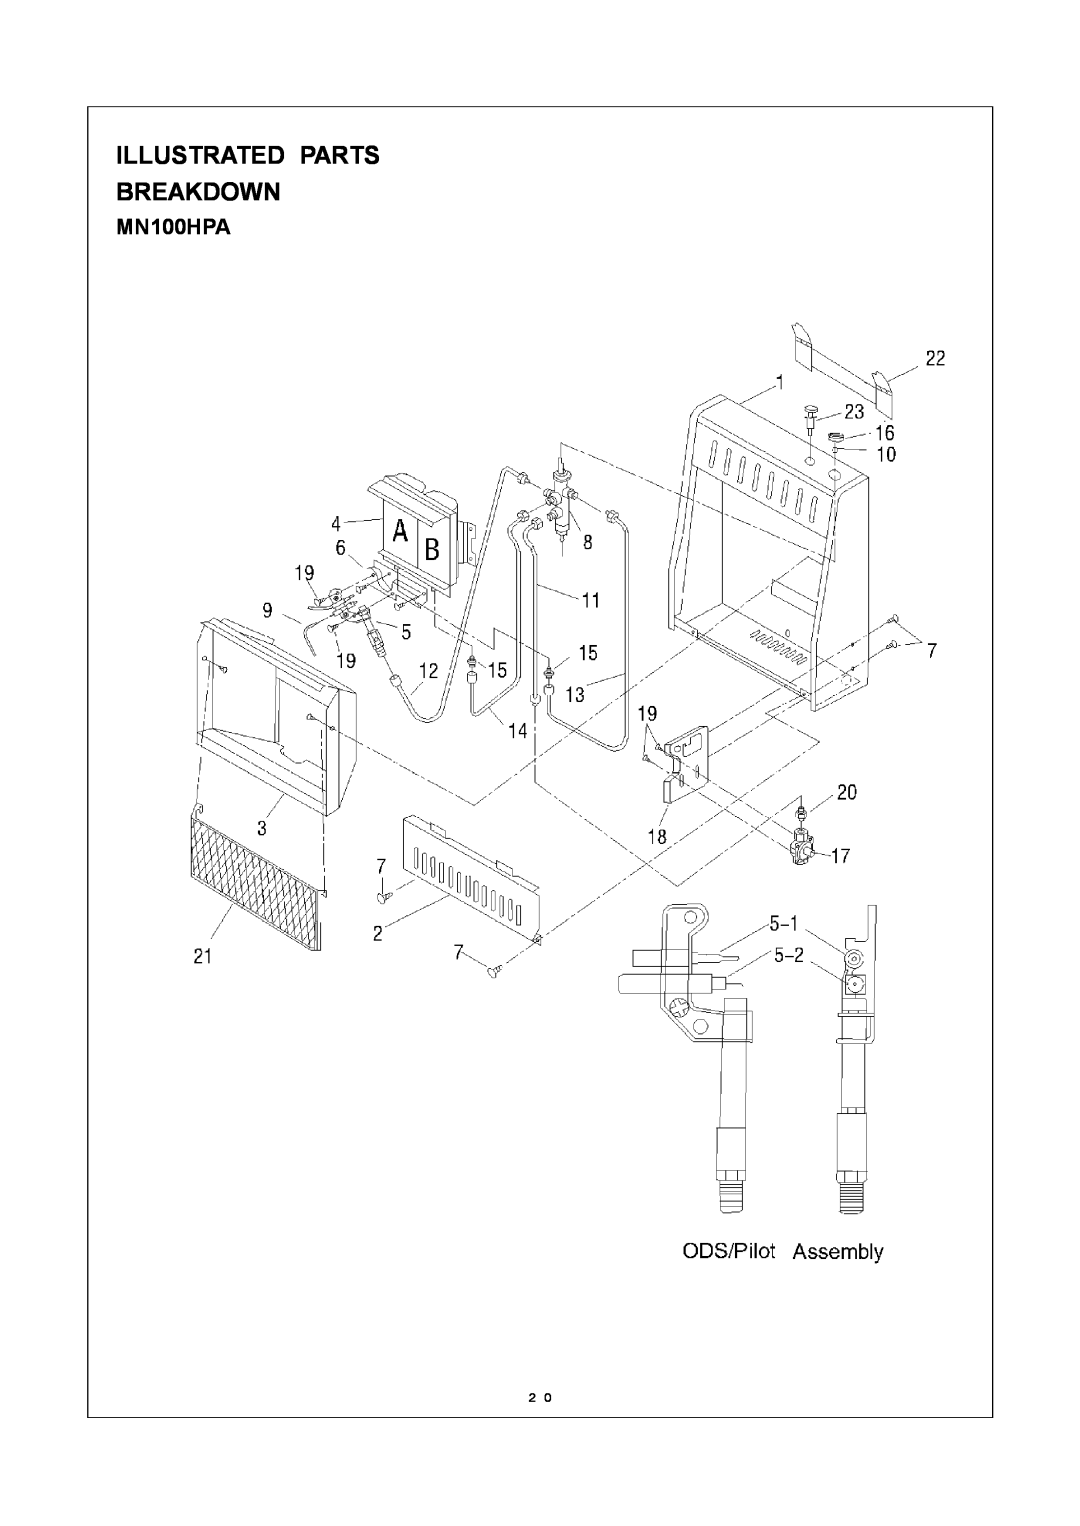 Procom MN060HPA, MN100TPA installation manual MN100HPA, Illustrated Parts Breakdown 